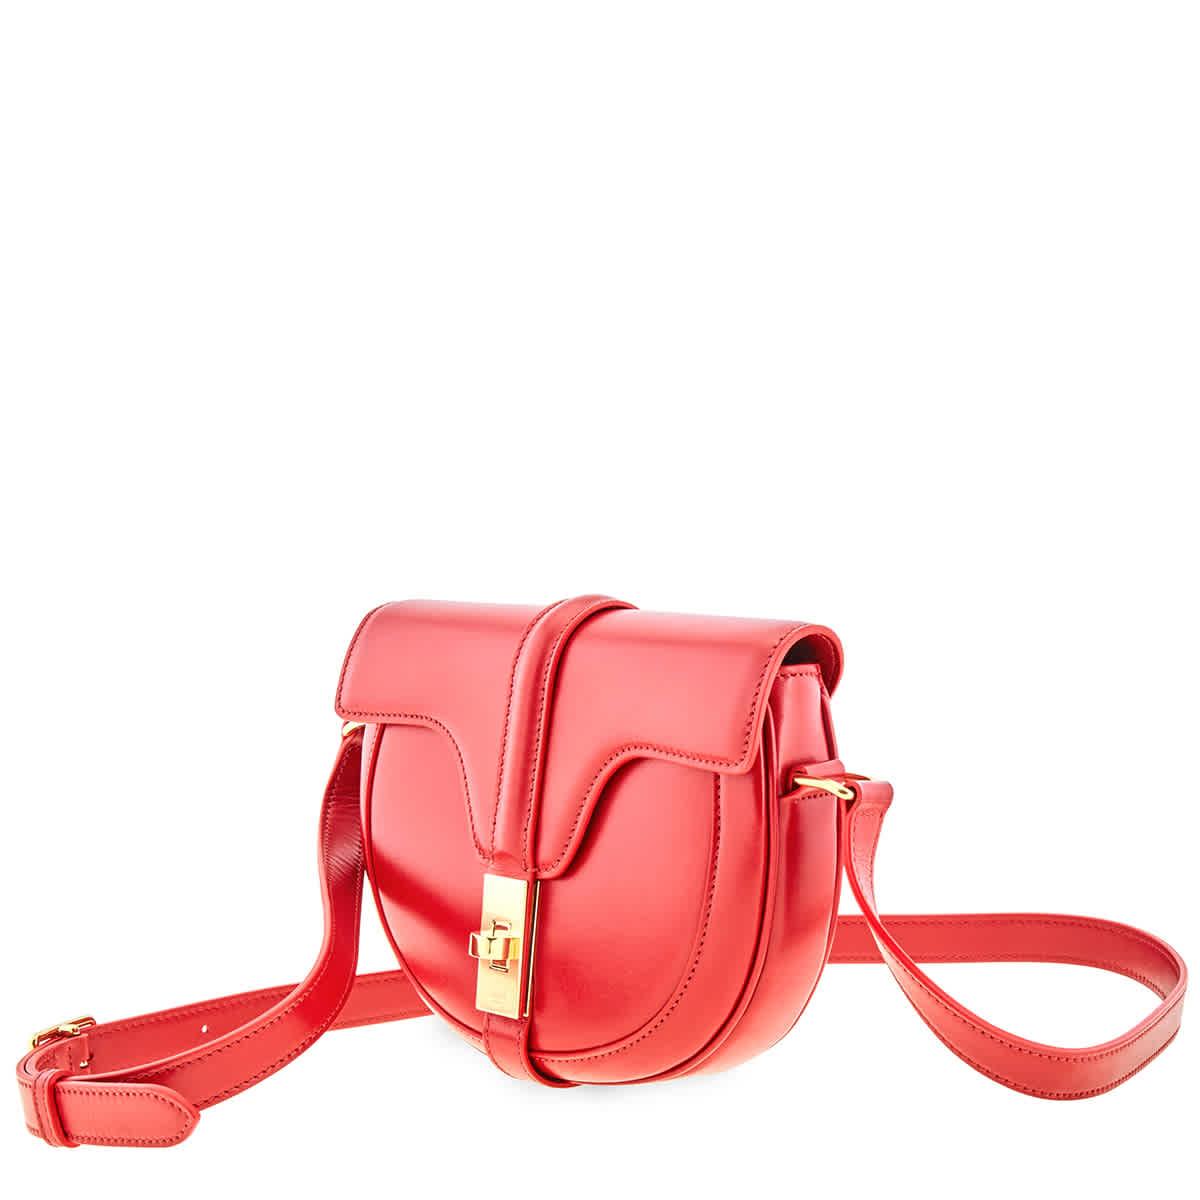 Celine Leather Small Besace 16 Bag In Satinated Calfskin in Gold Tone,Red  (Pink) - Lyst